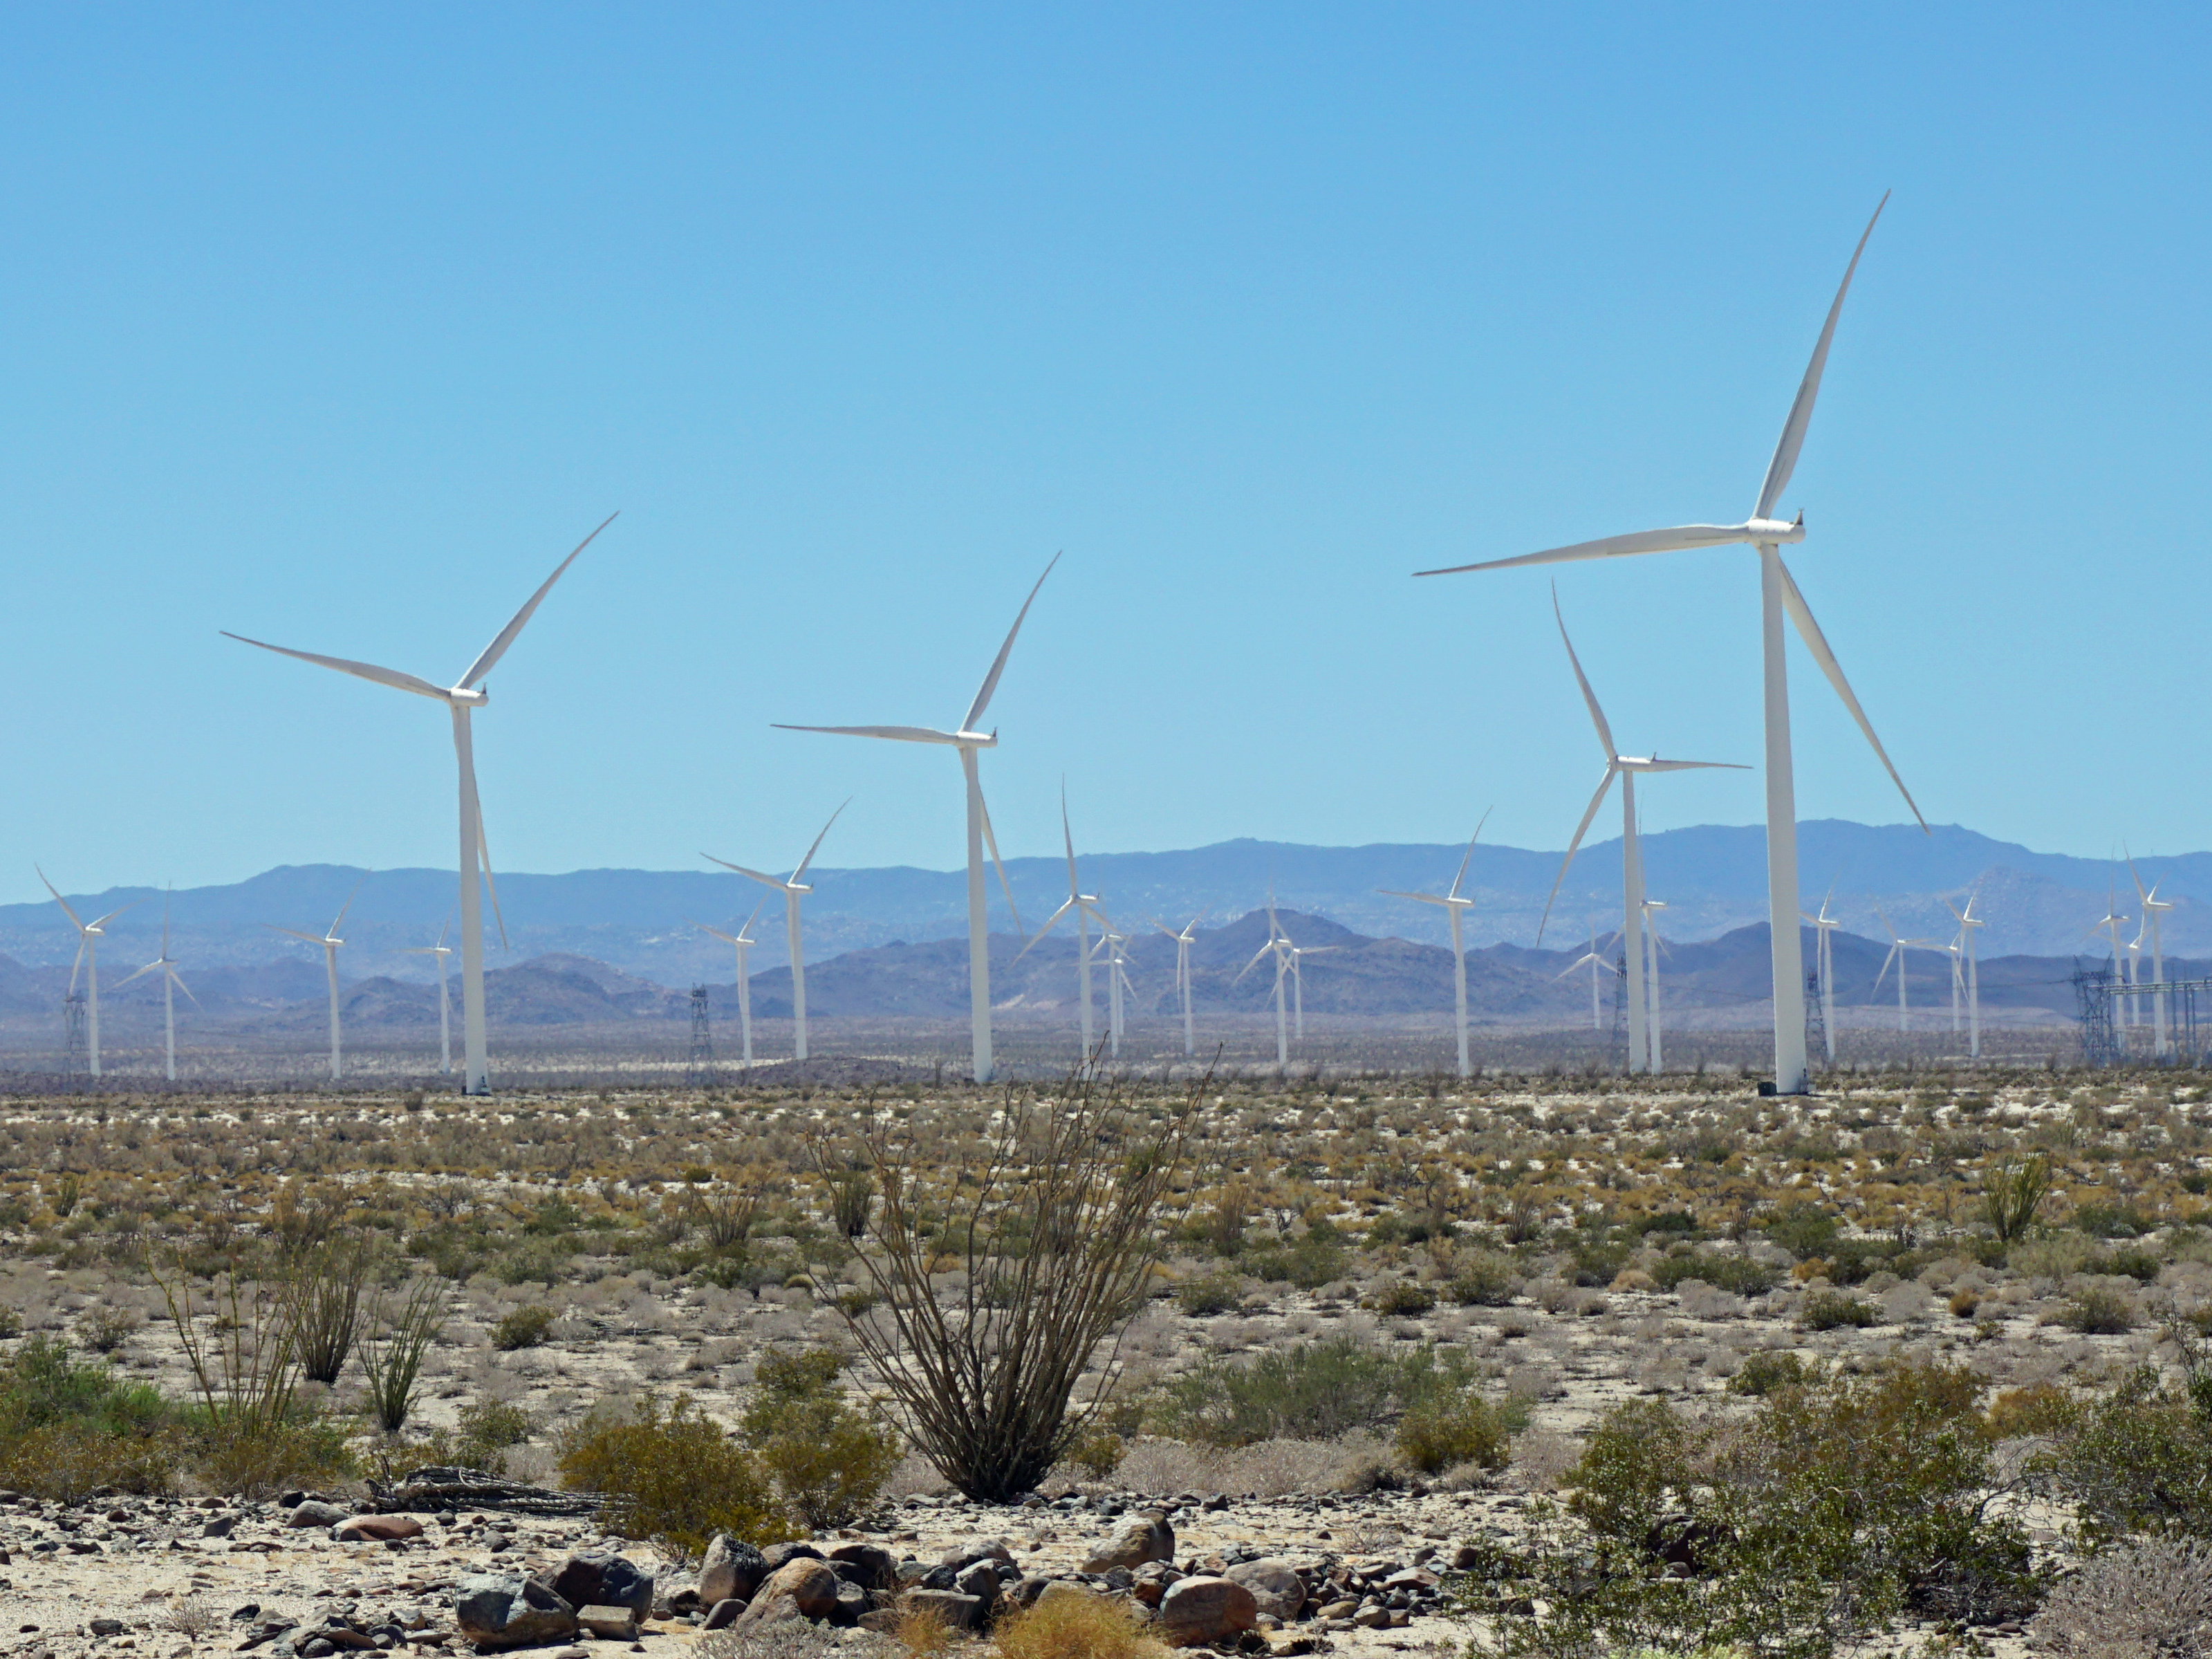 About a quarter of California's electricity comes from renewable sources, like this wind farm outside San Diego.